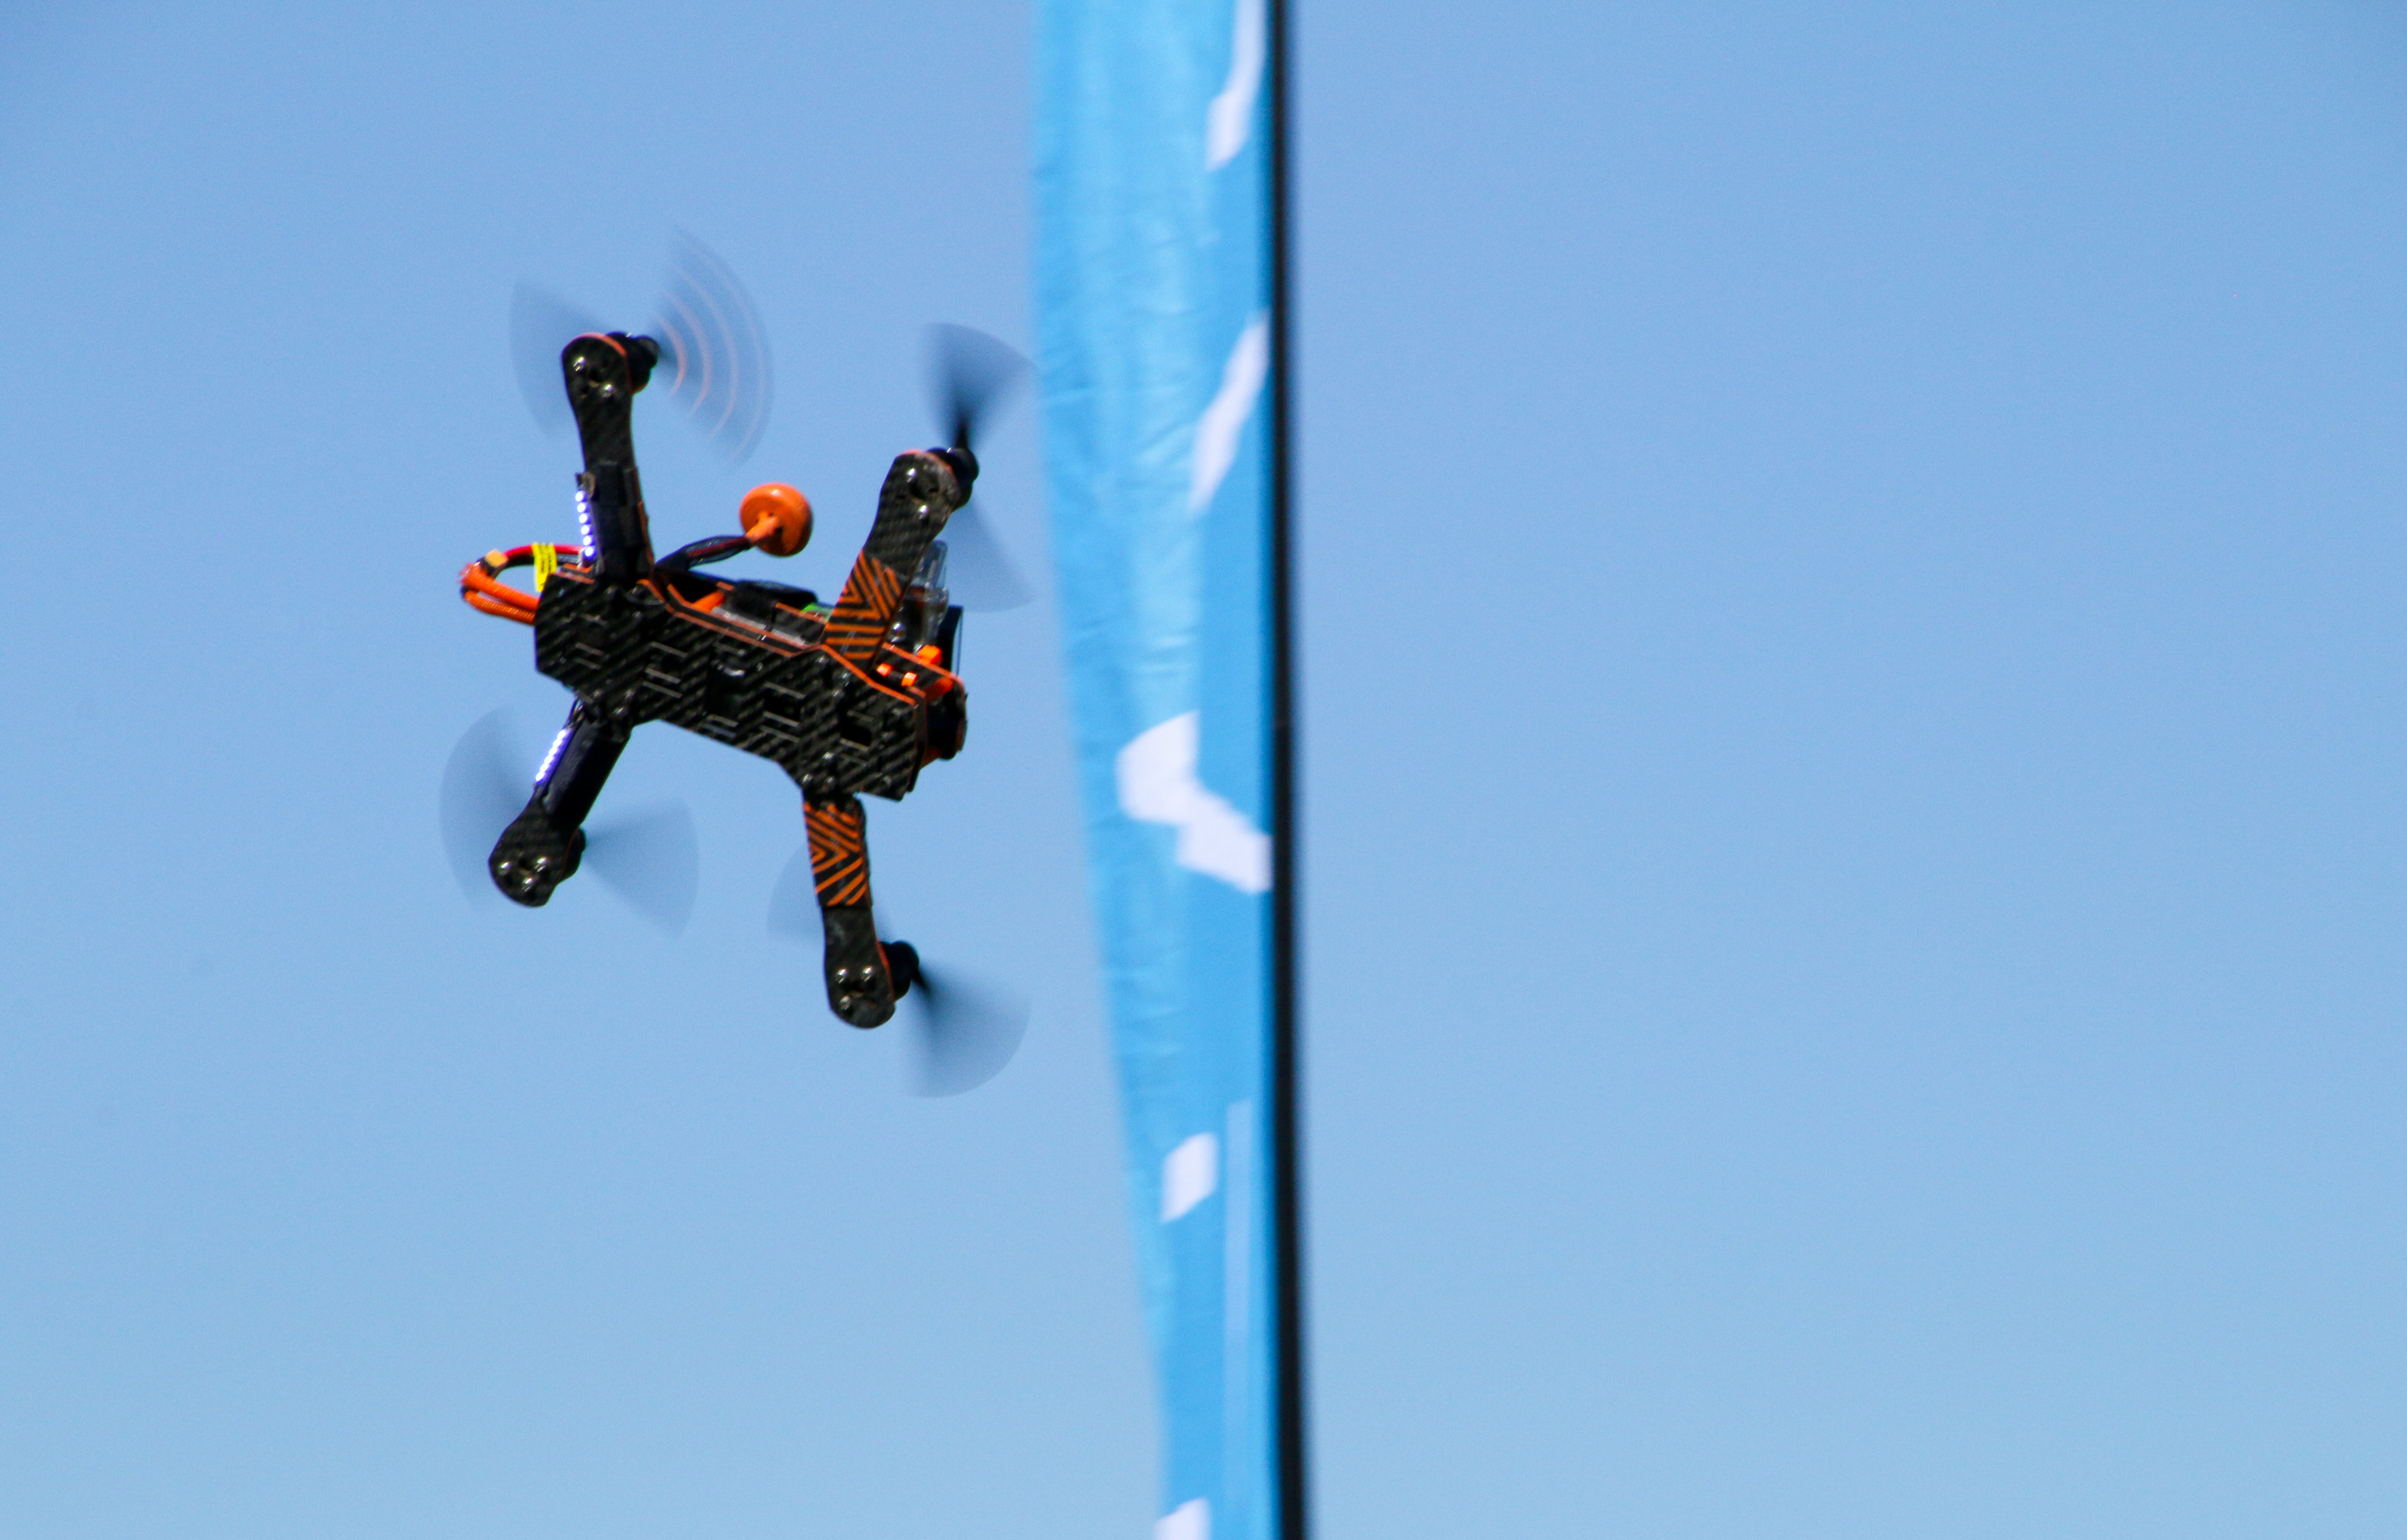 The next sport coming to ESPN is … drone racing